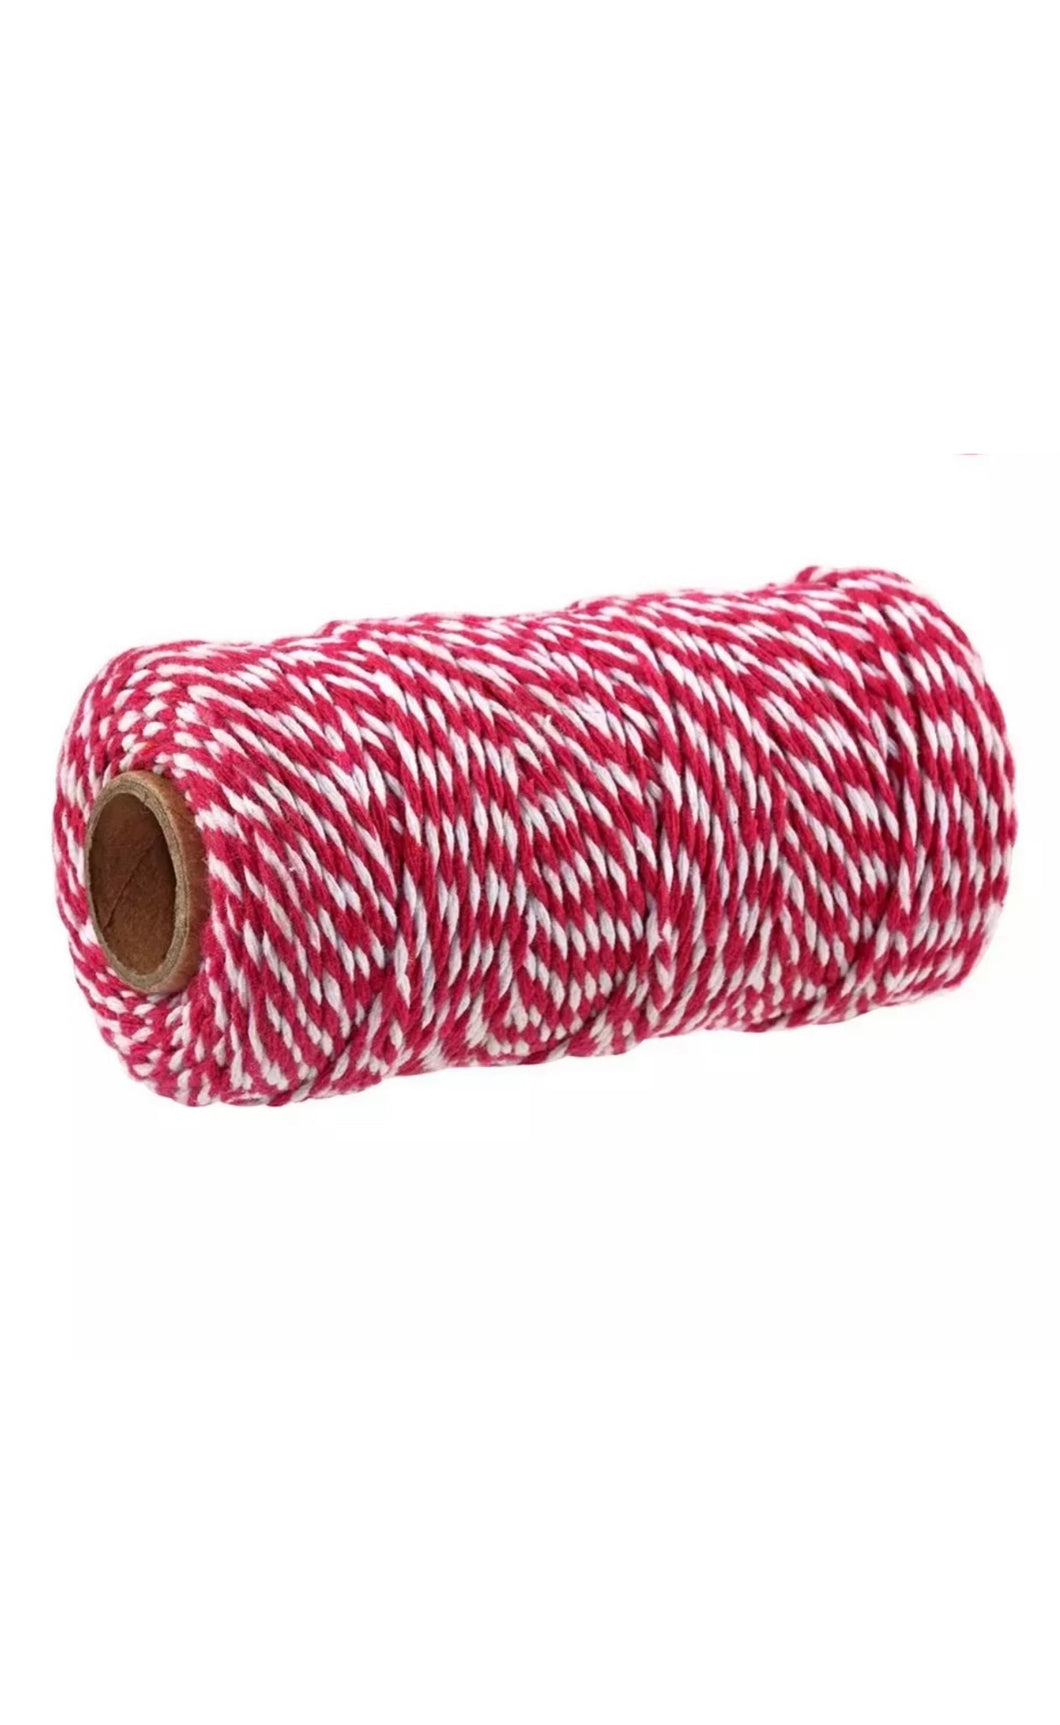 Bakers Twine 100m - Red/White